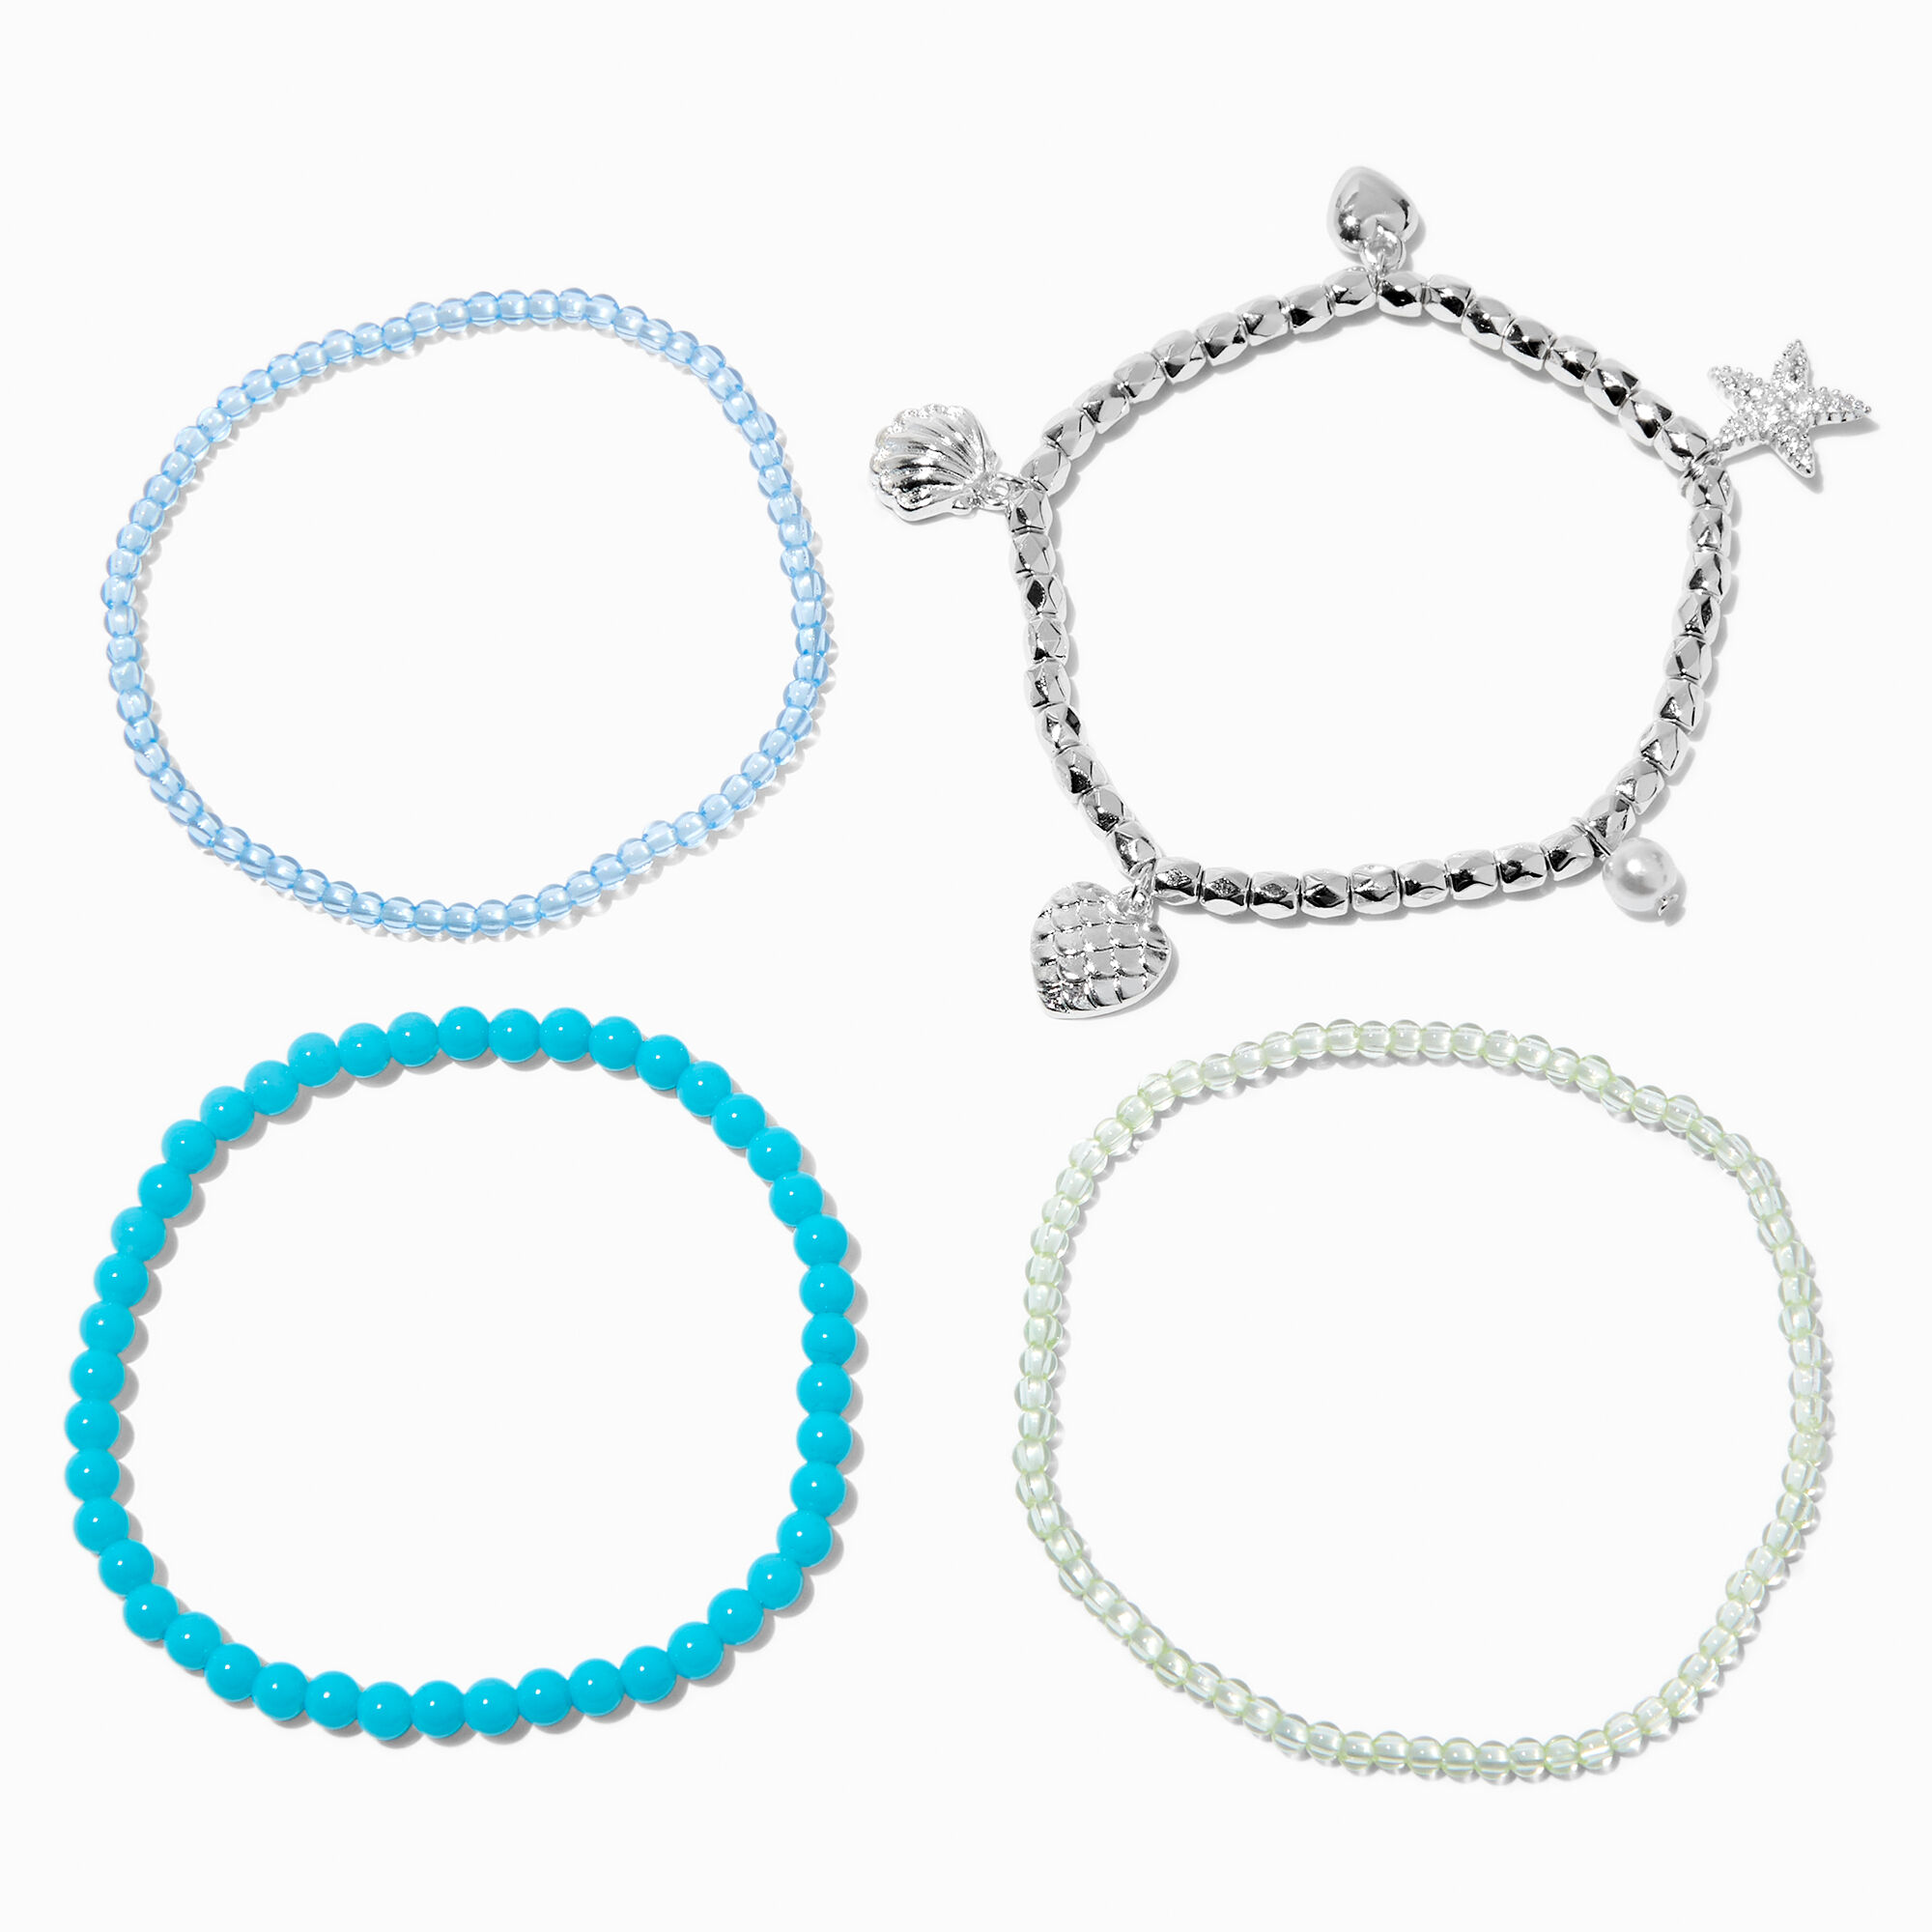 View Claires Mermaid Stretch Bracelets 4 Pack Turquoise information